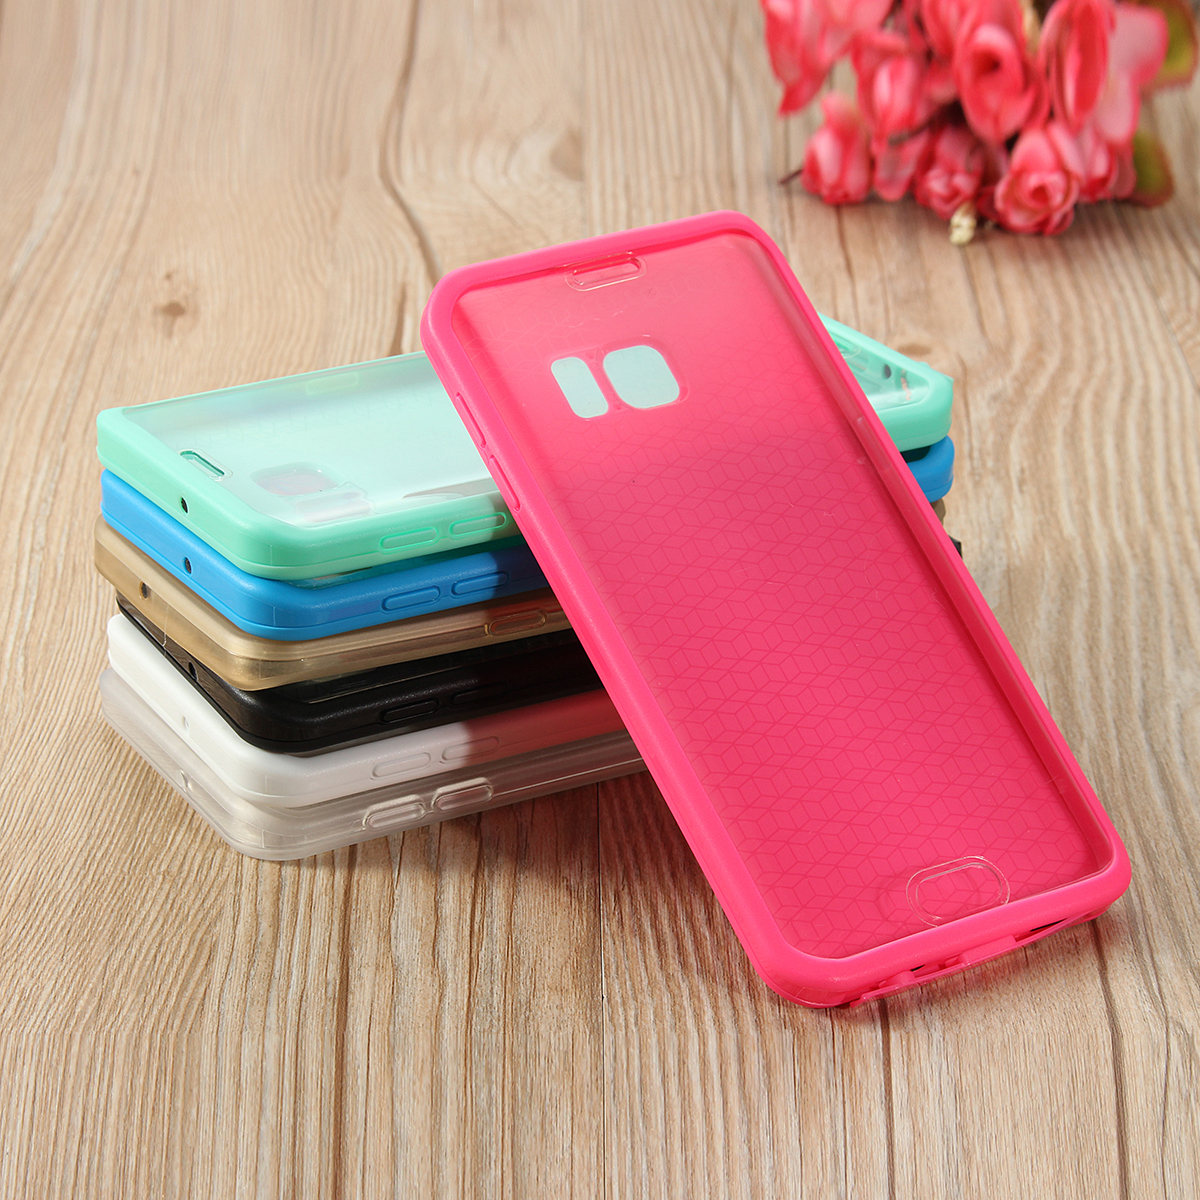 Genuine Waterproof Shockproof Dustproof Touch Screen TPU Case Cover For Samsung S6 Edge Plus